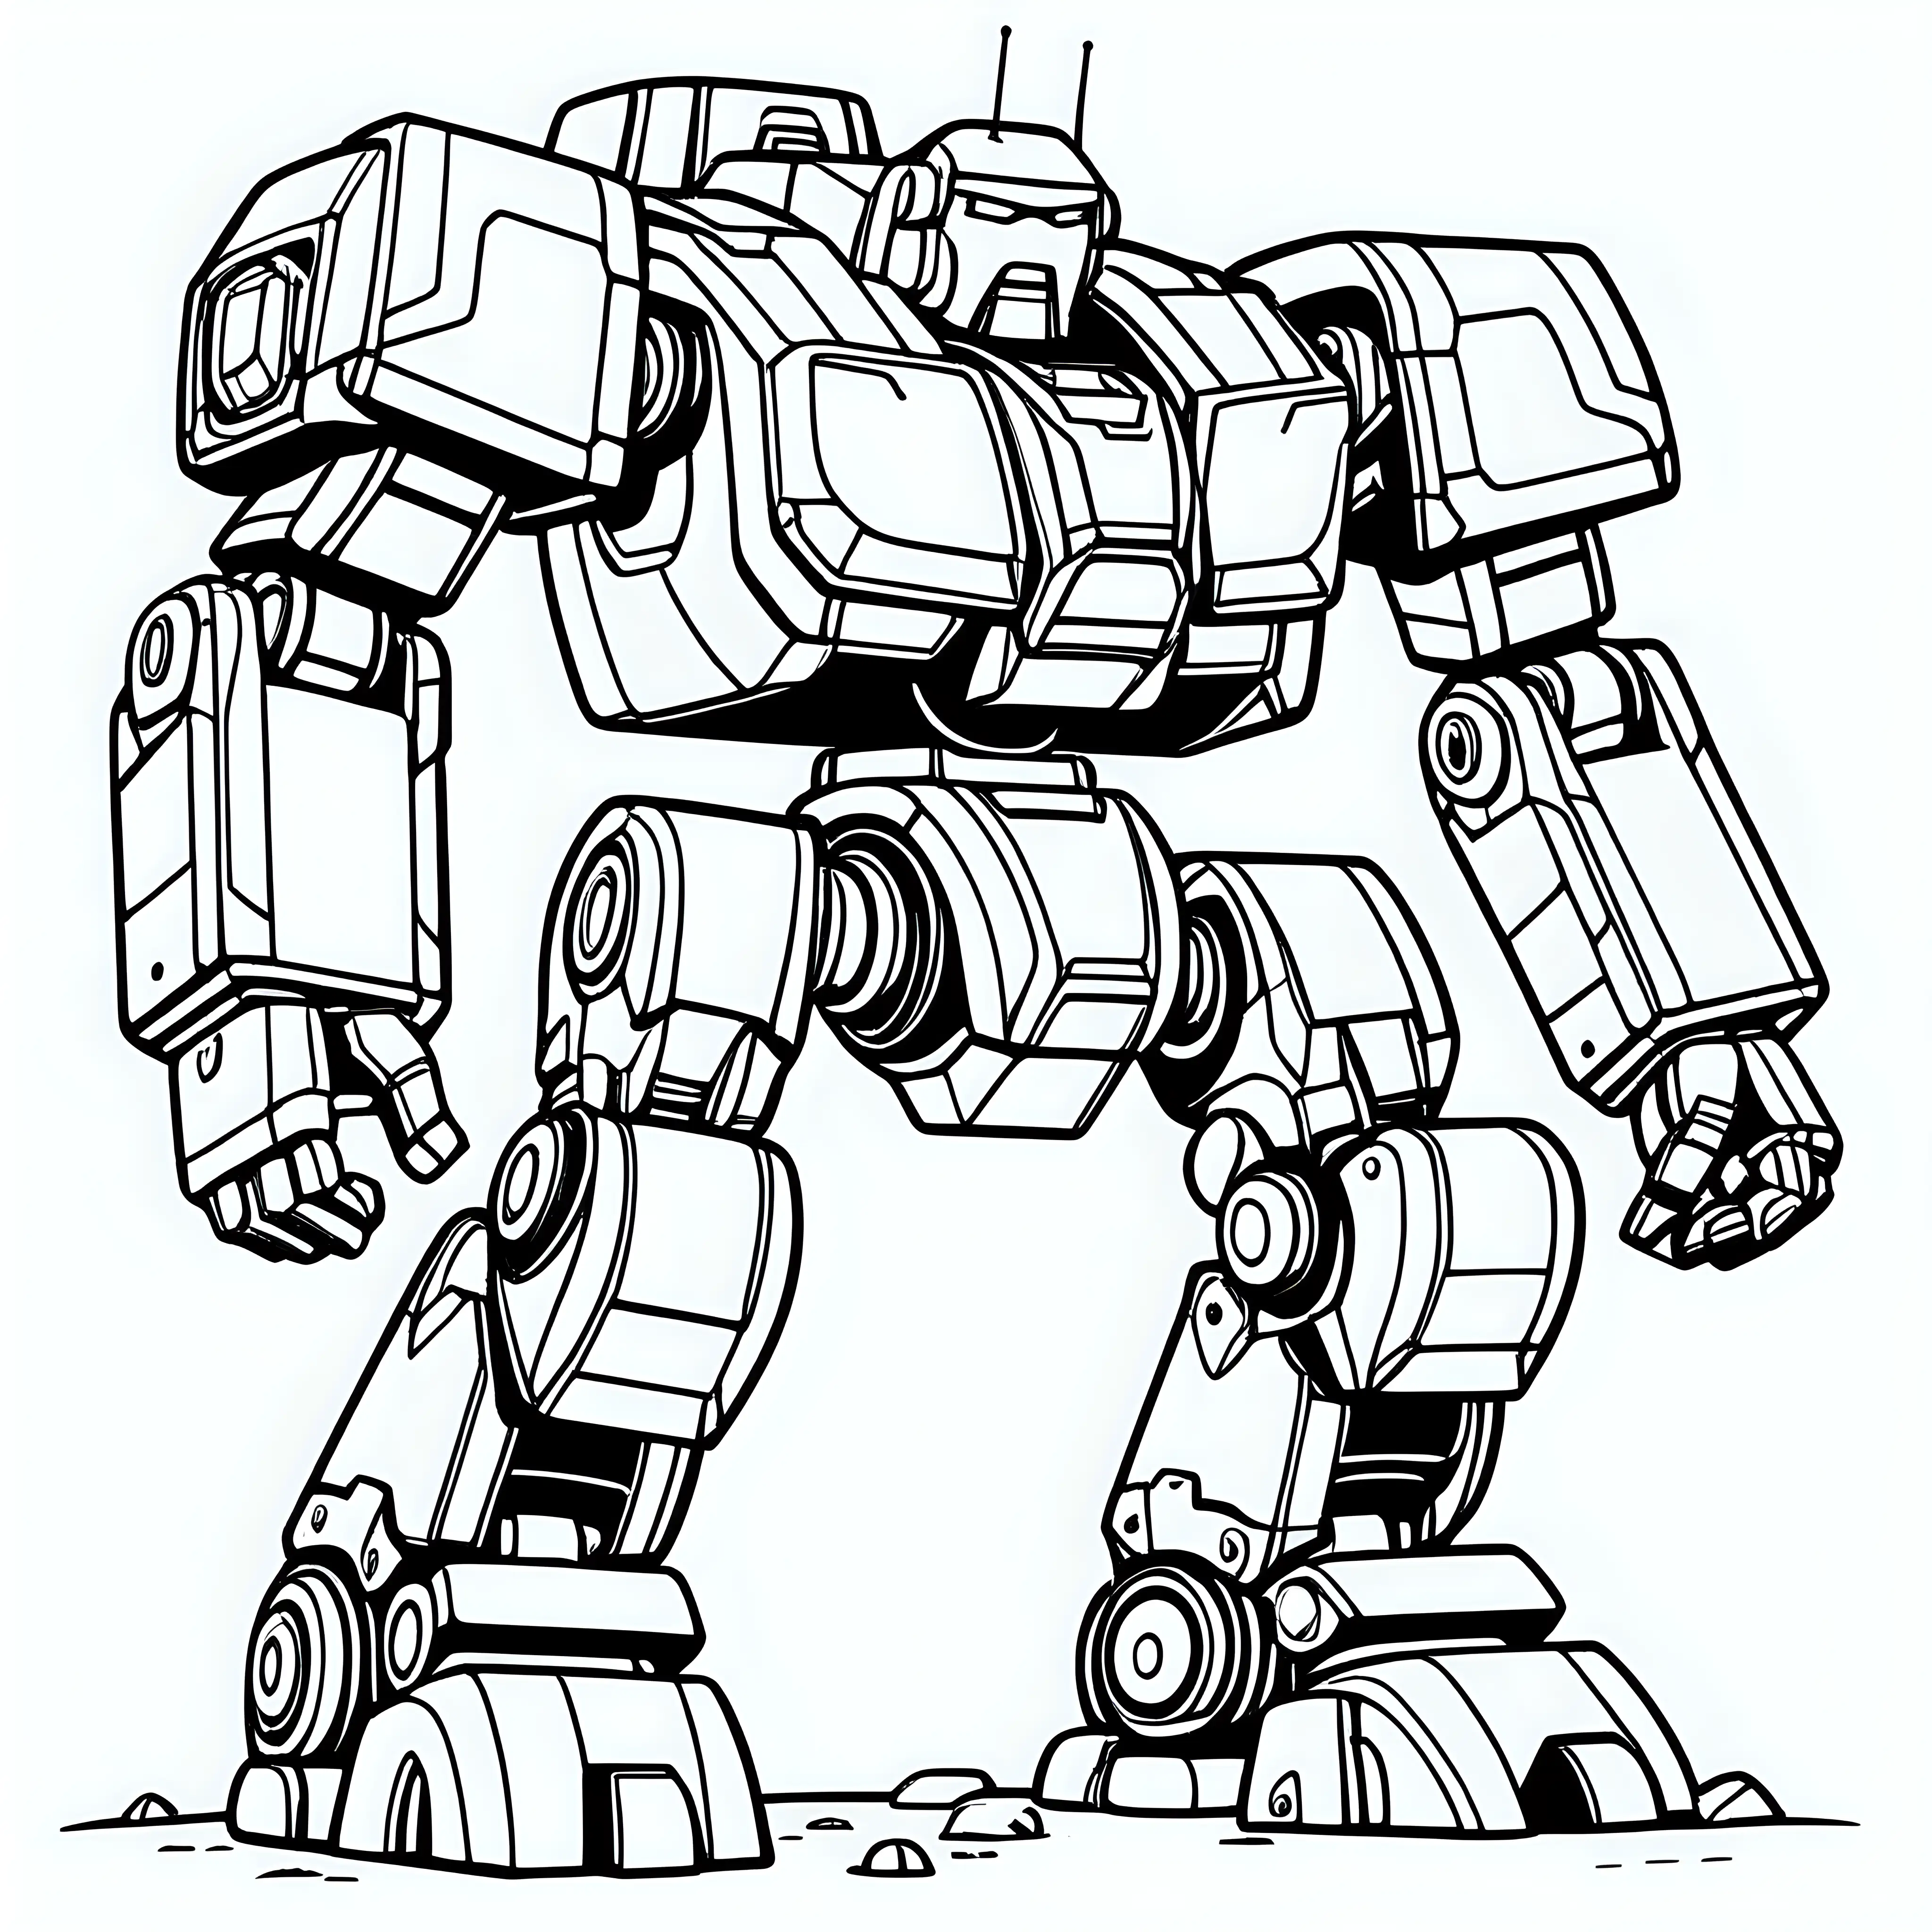 Chunky Heavy Mech Coloring Page for Children Bold and Playful Robot Design